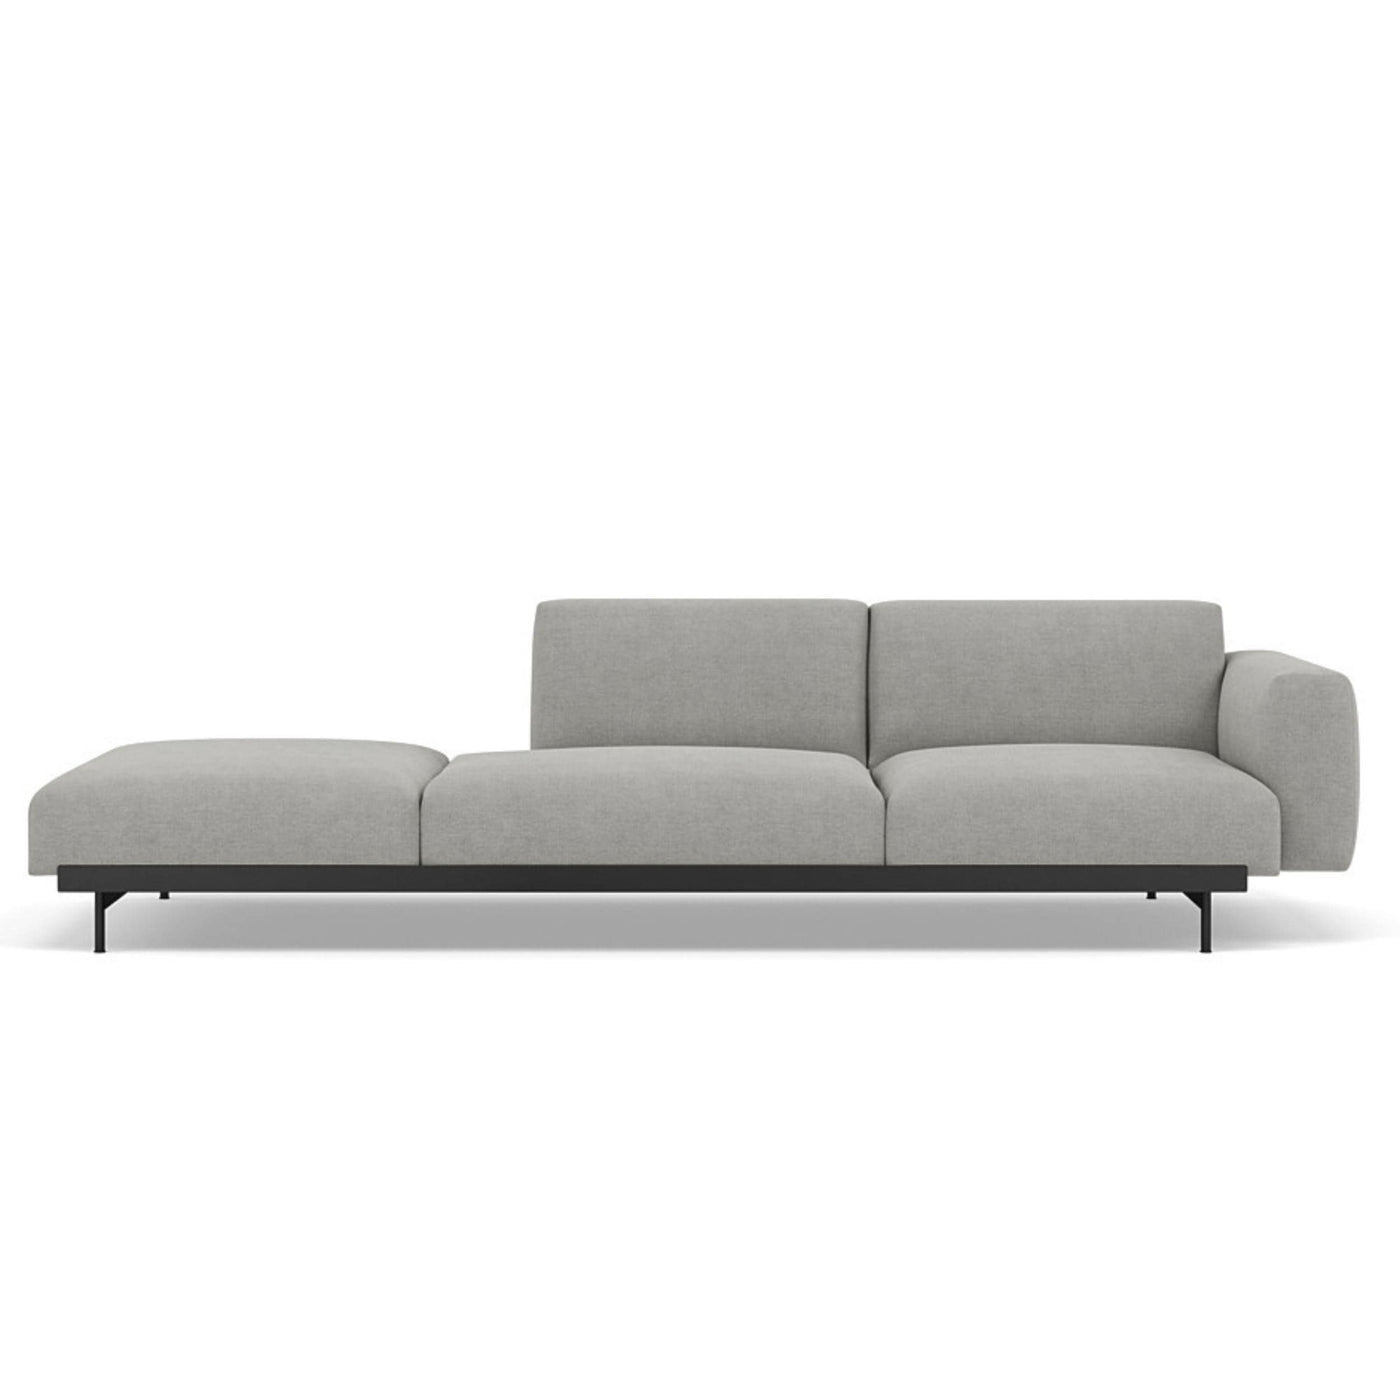 Muuto In Situ Modular 3 Seater Sofa configuration 4. Made to order from someday designs. #colour_fiord-151